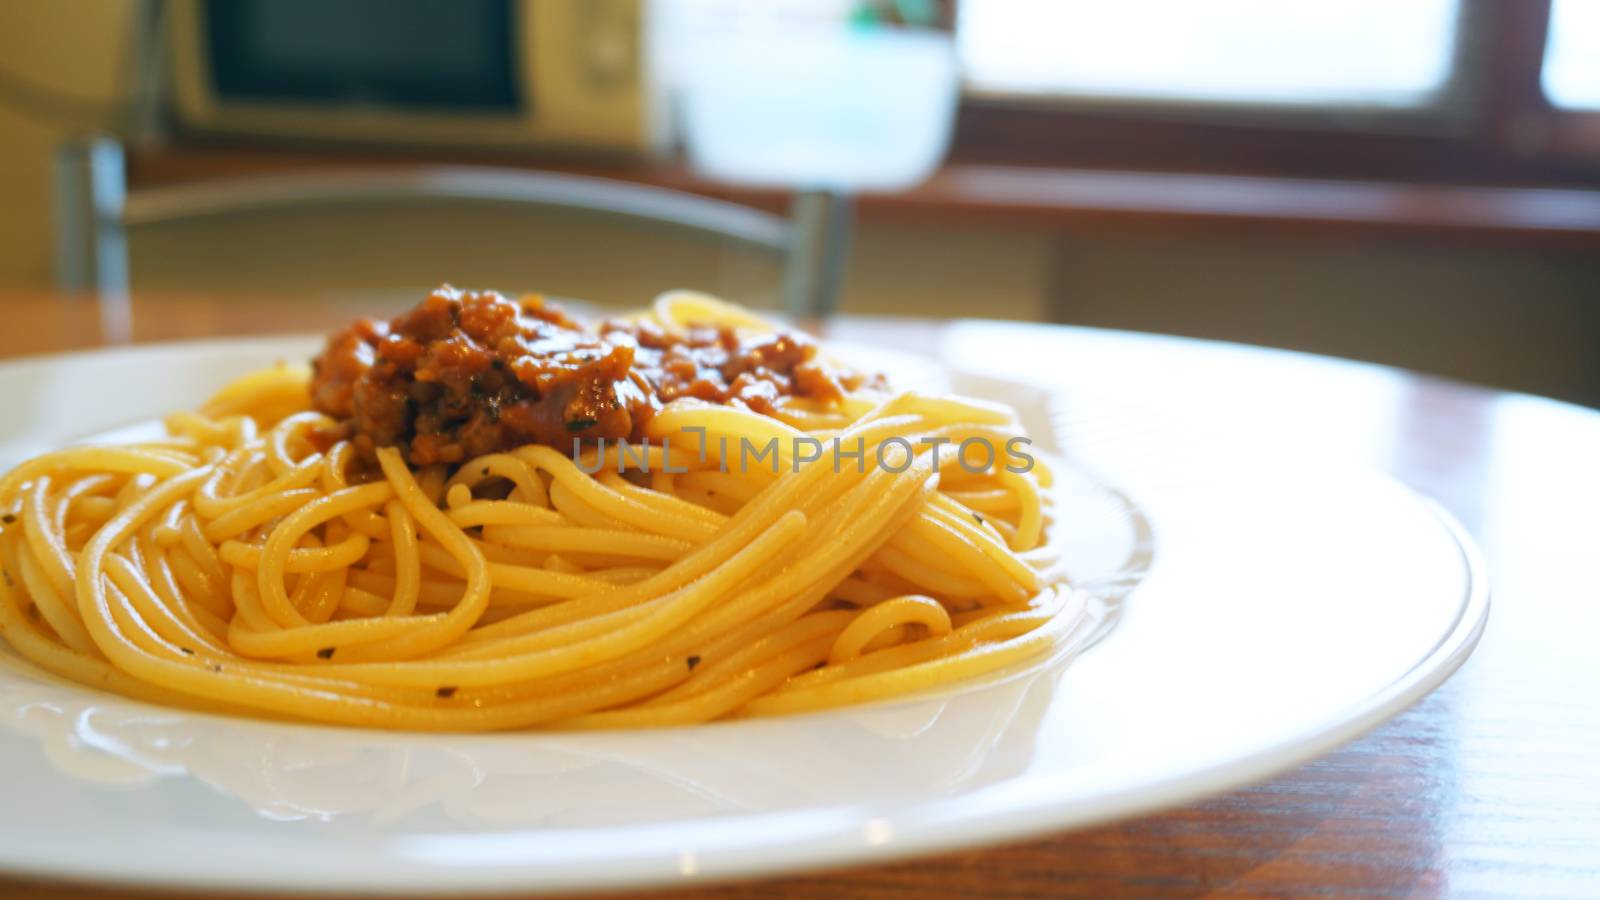 Plate of delicious spaghetti Bolognaise or Bolognese with savory minced beef and tomato sauce garnished, overhead view